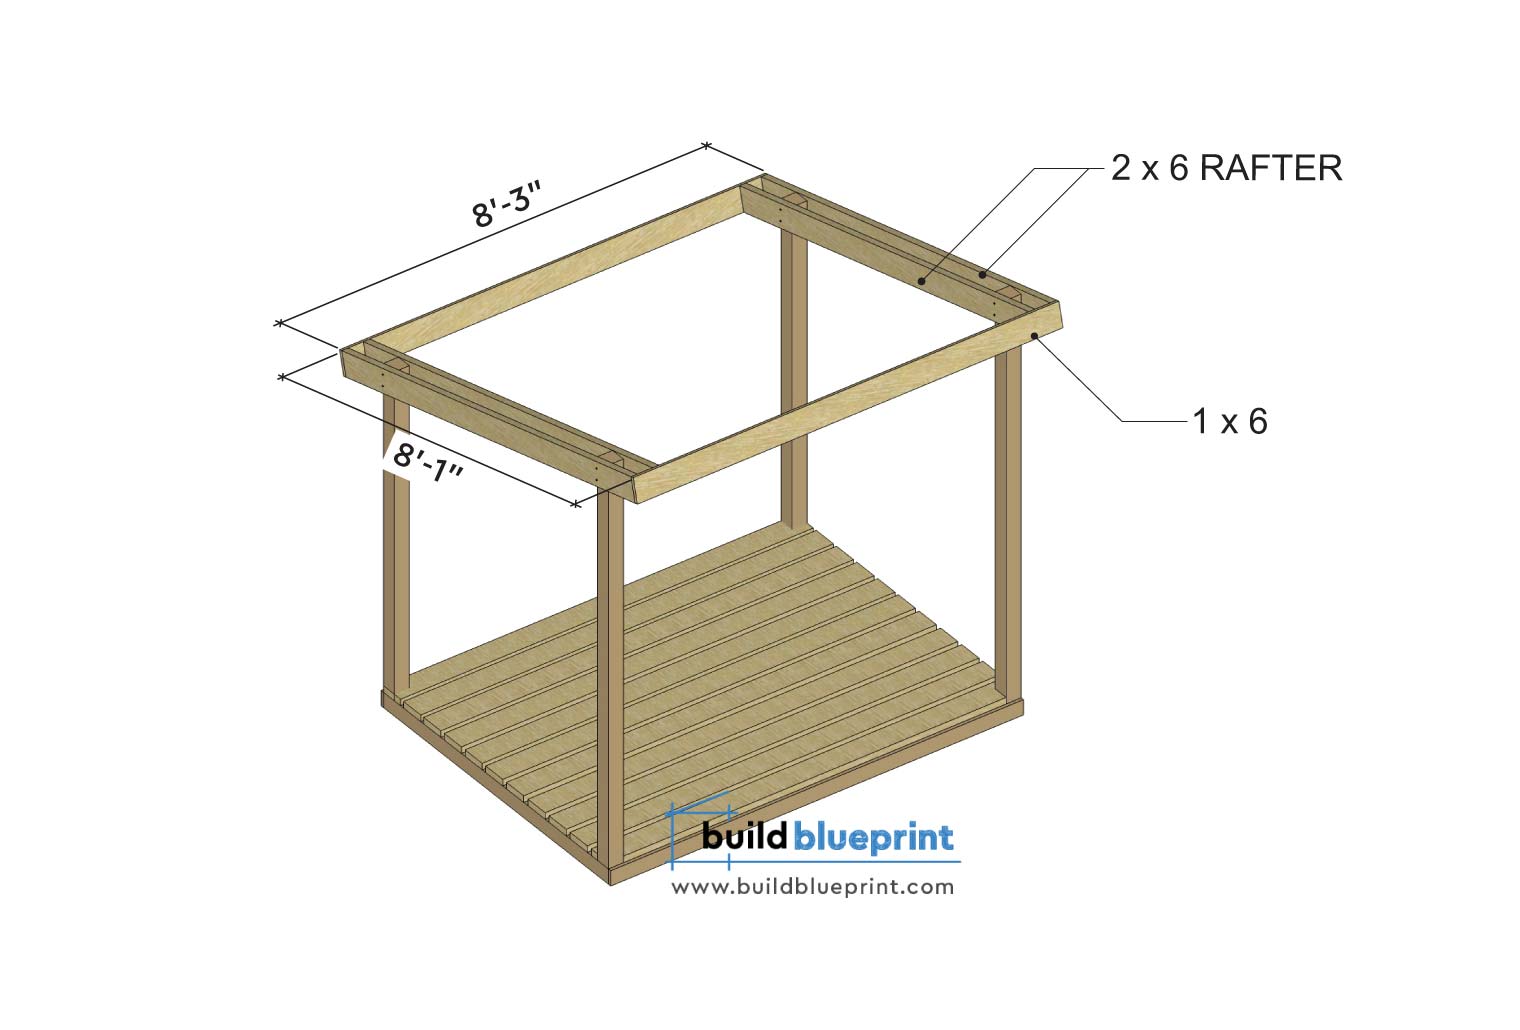 6x8 firewood shed rafters